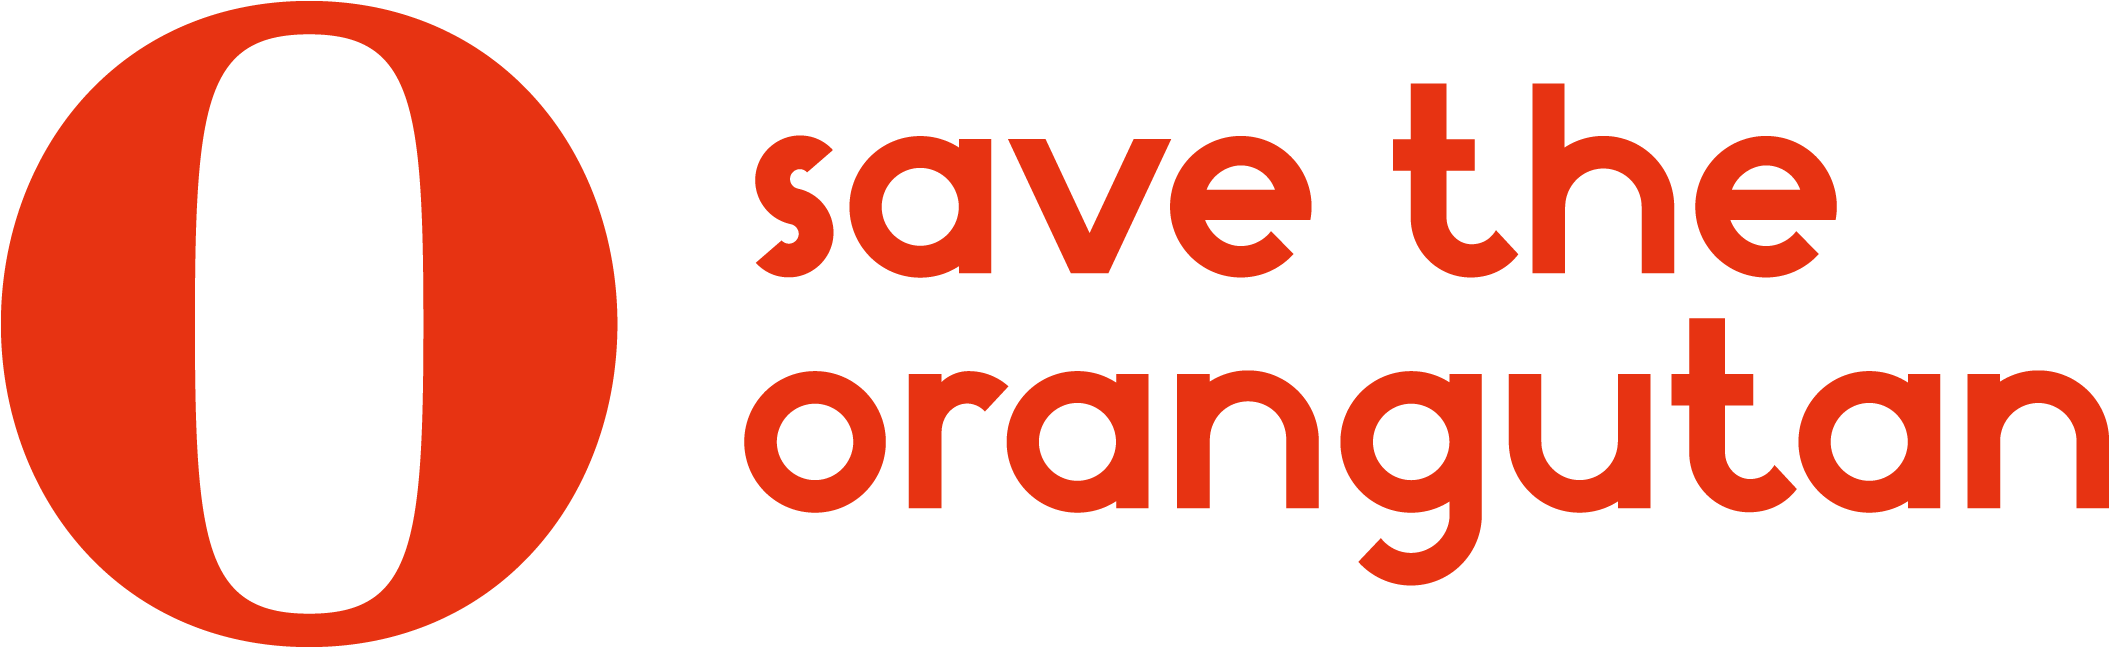 Our New Logo Is An Orange O , And We Will In The Future - Alternative Sources Of Energy (2226x764)